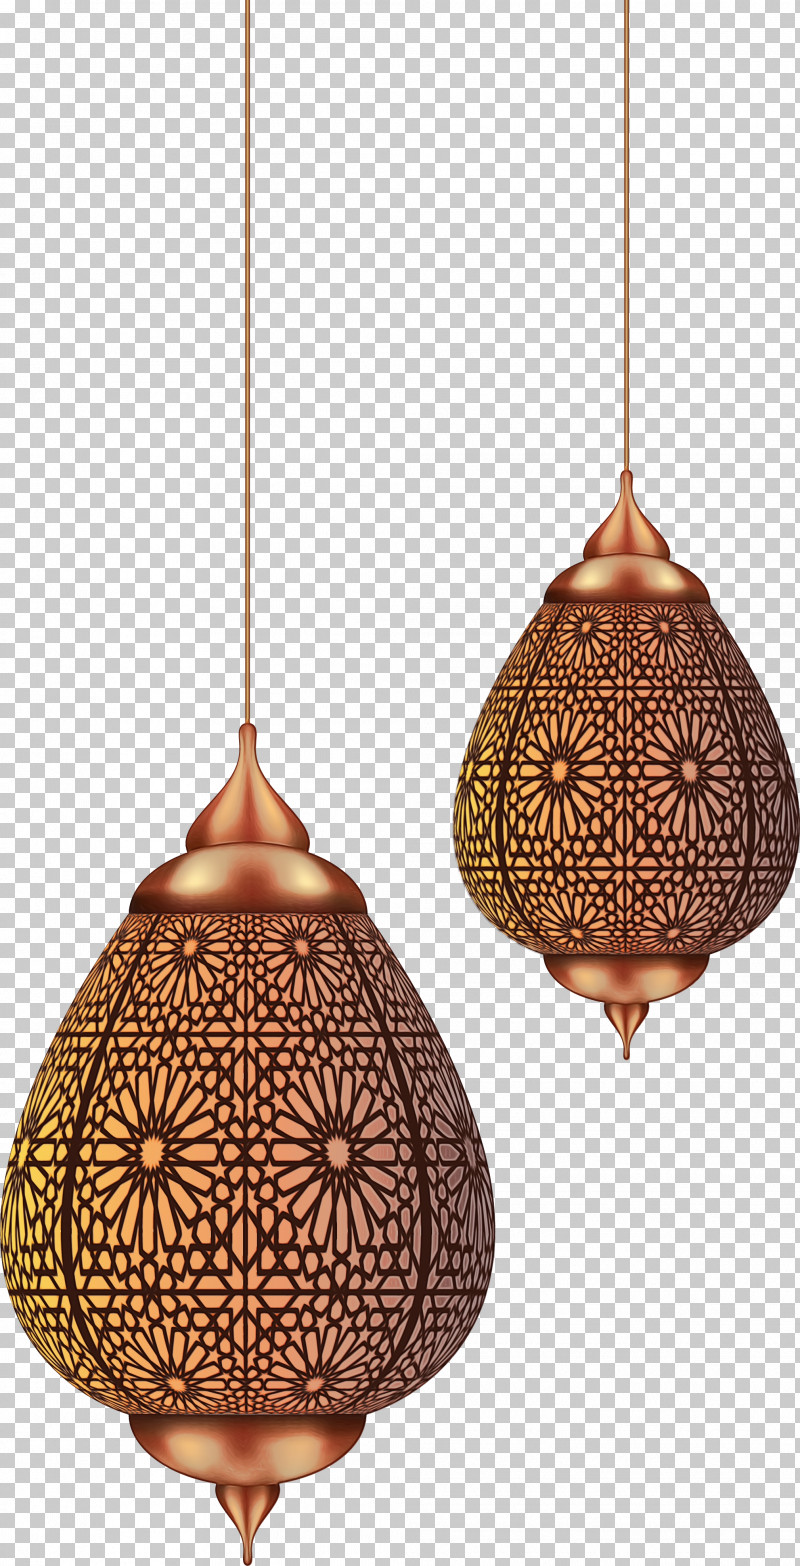 Lighting Light Fixture Lamp Lighting Accessory Lampshade PNG, Clipart, Ceiling Fixture, Copper, Lamp, Lampshade, Lantern Free PNG Download